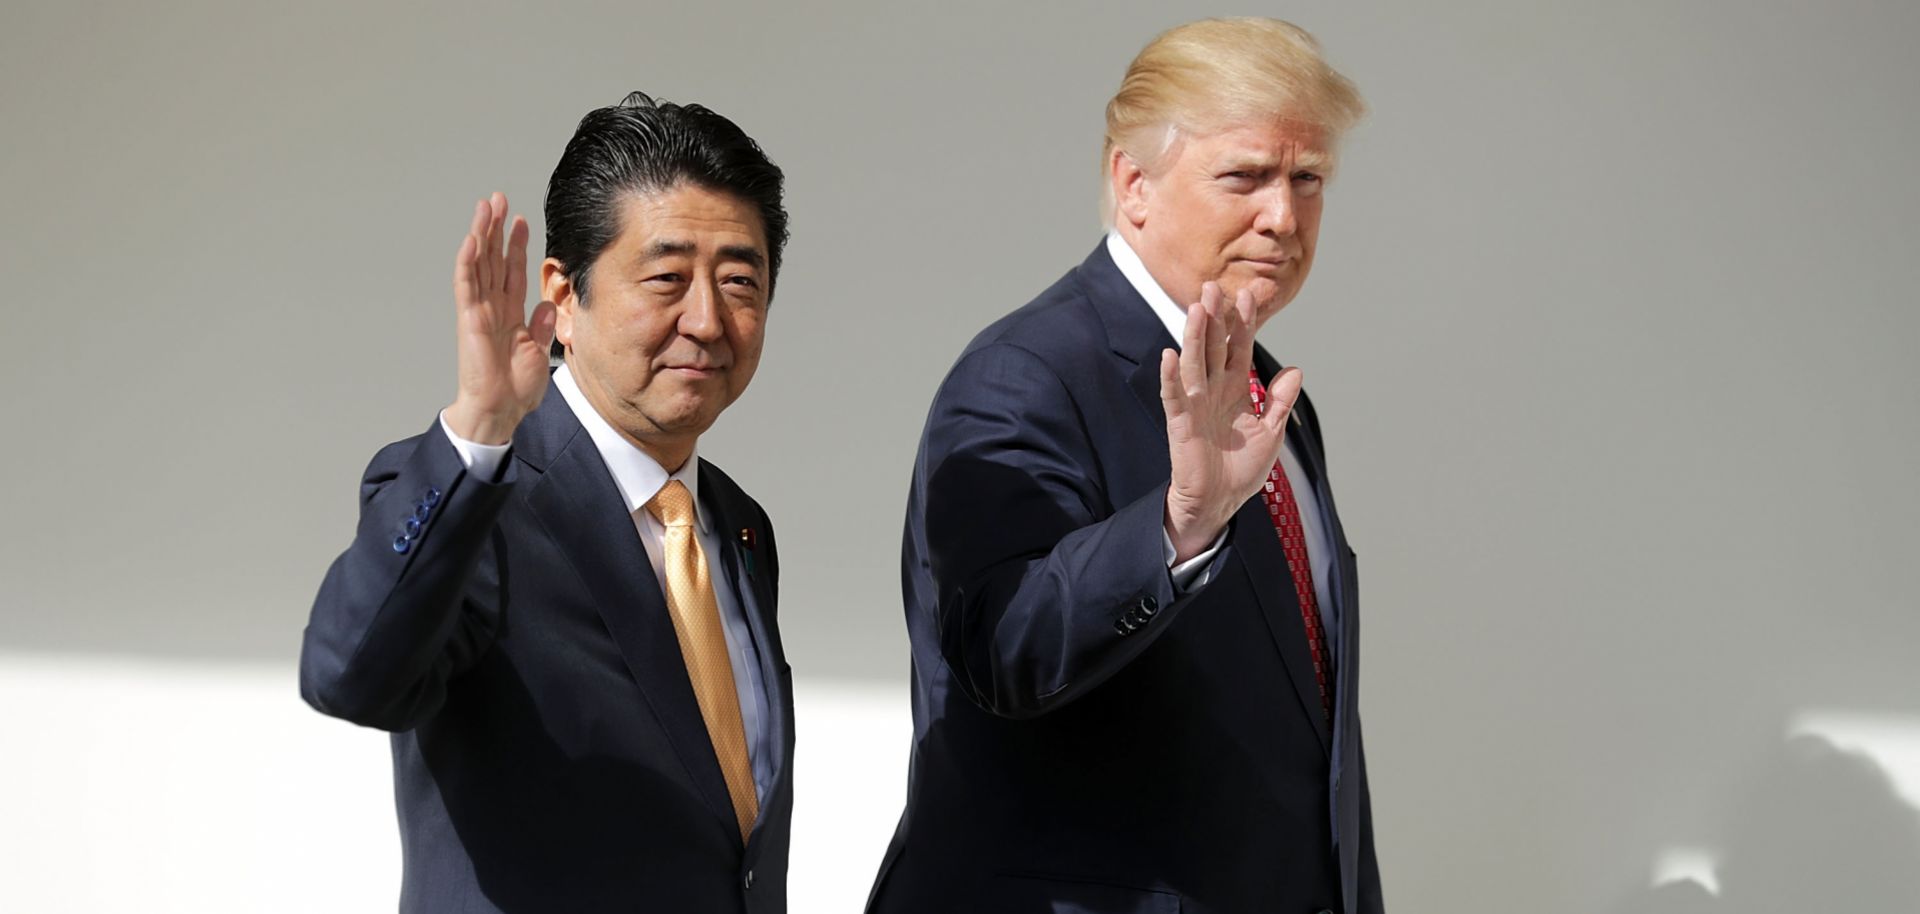 U.S. President Donald Trump and Japanese Prime Minister Shinzo Abe during Abe's Feb. 10, 2017, visit to the White House.